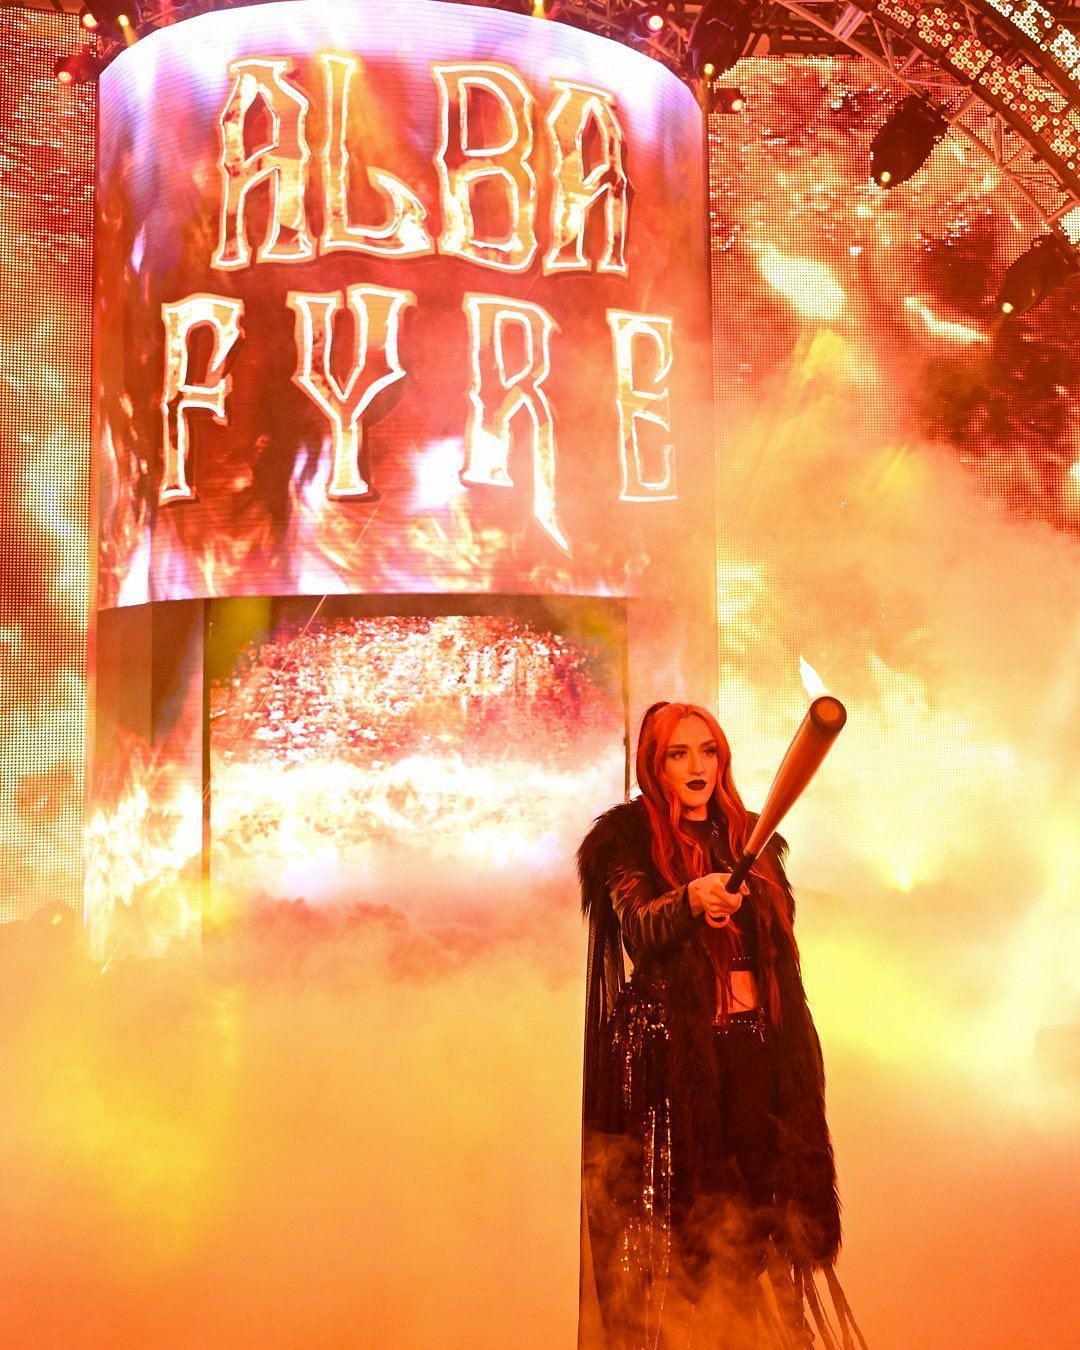 Alba Fyre makes an instant impression with her entrance